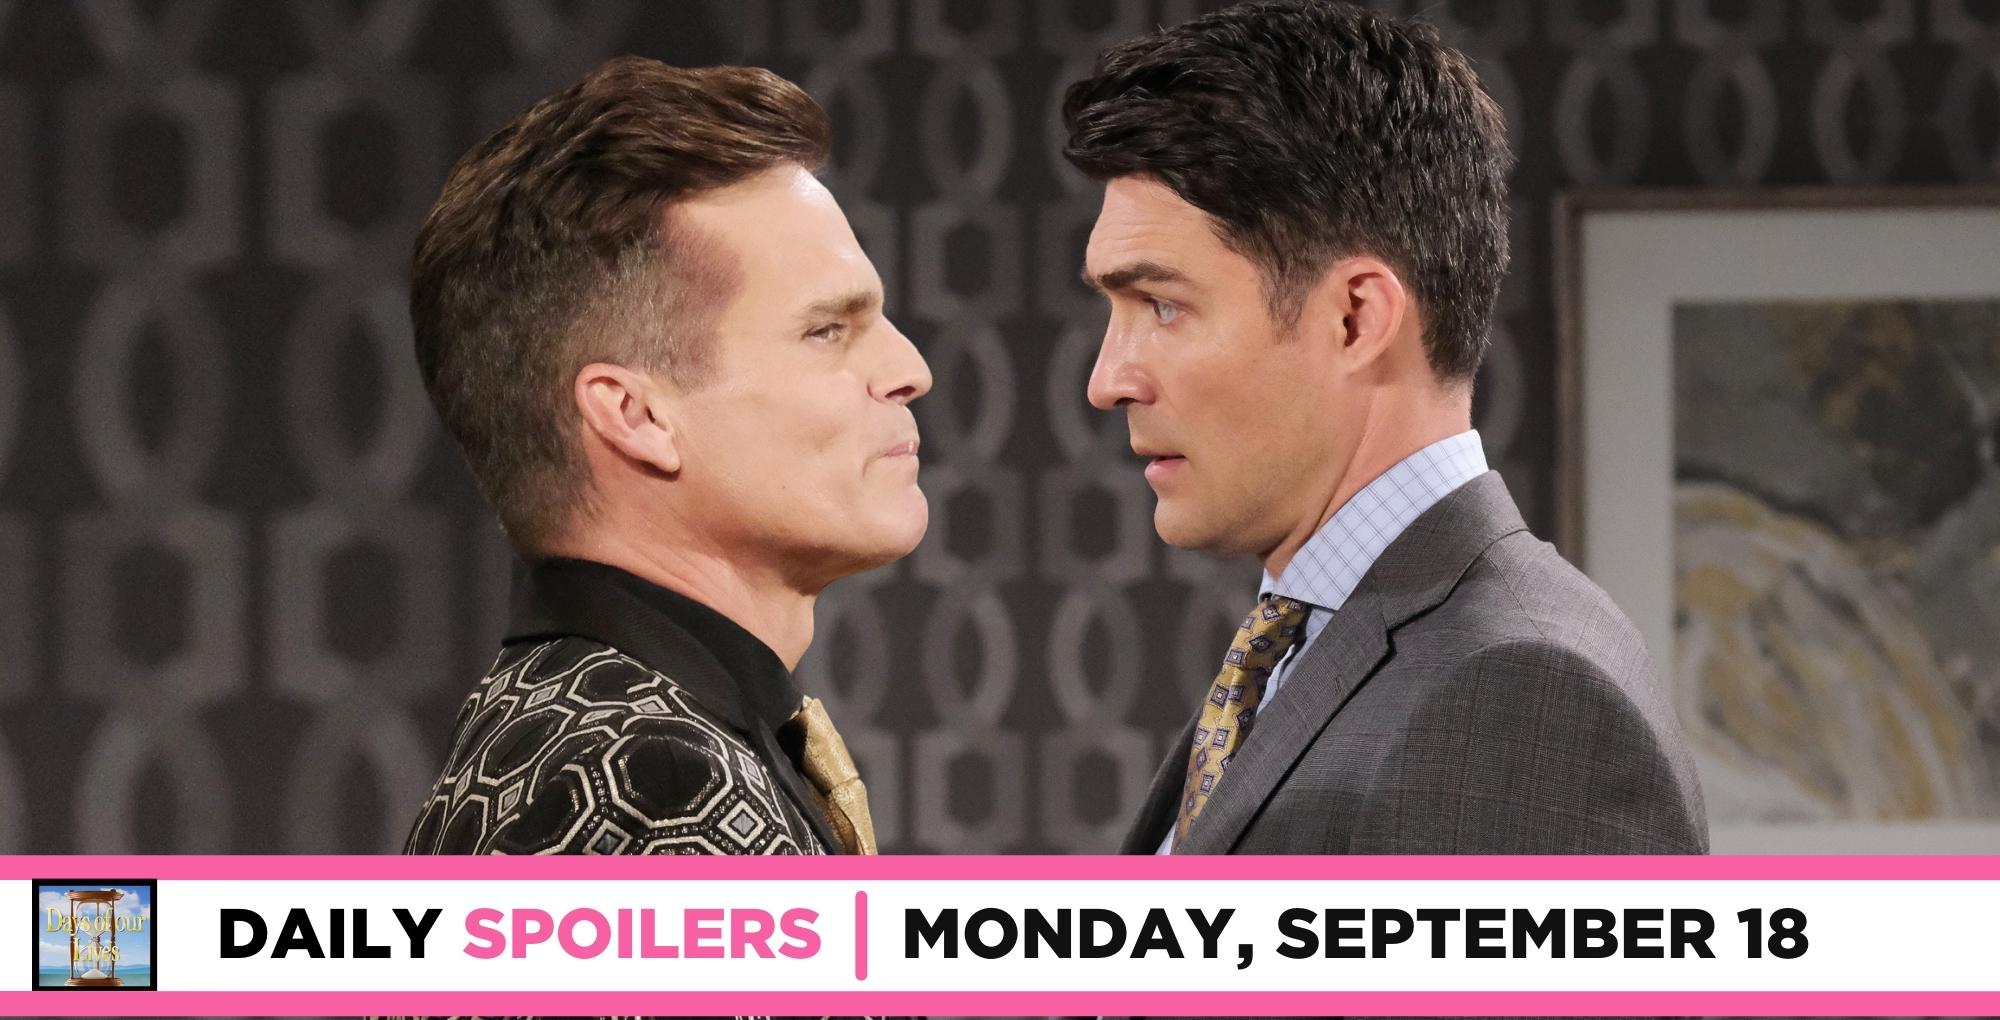 days of our lives spoilers for september 18, 2023, has leo confronting dimitri.